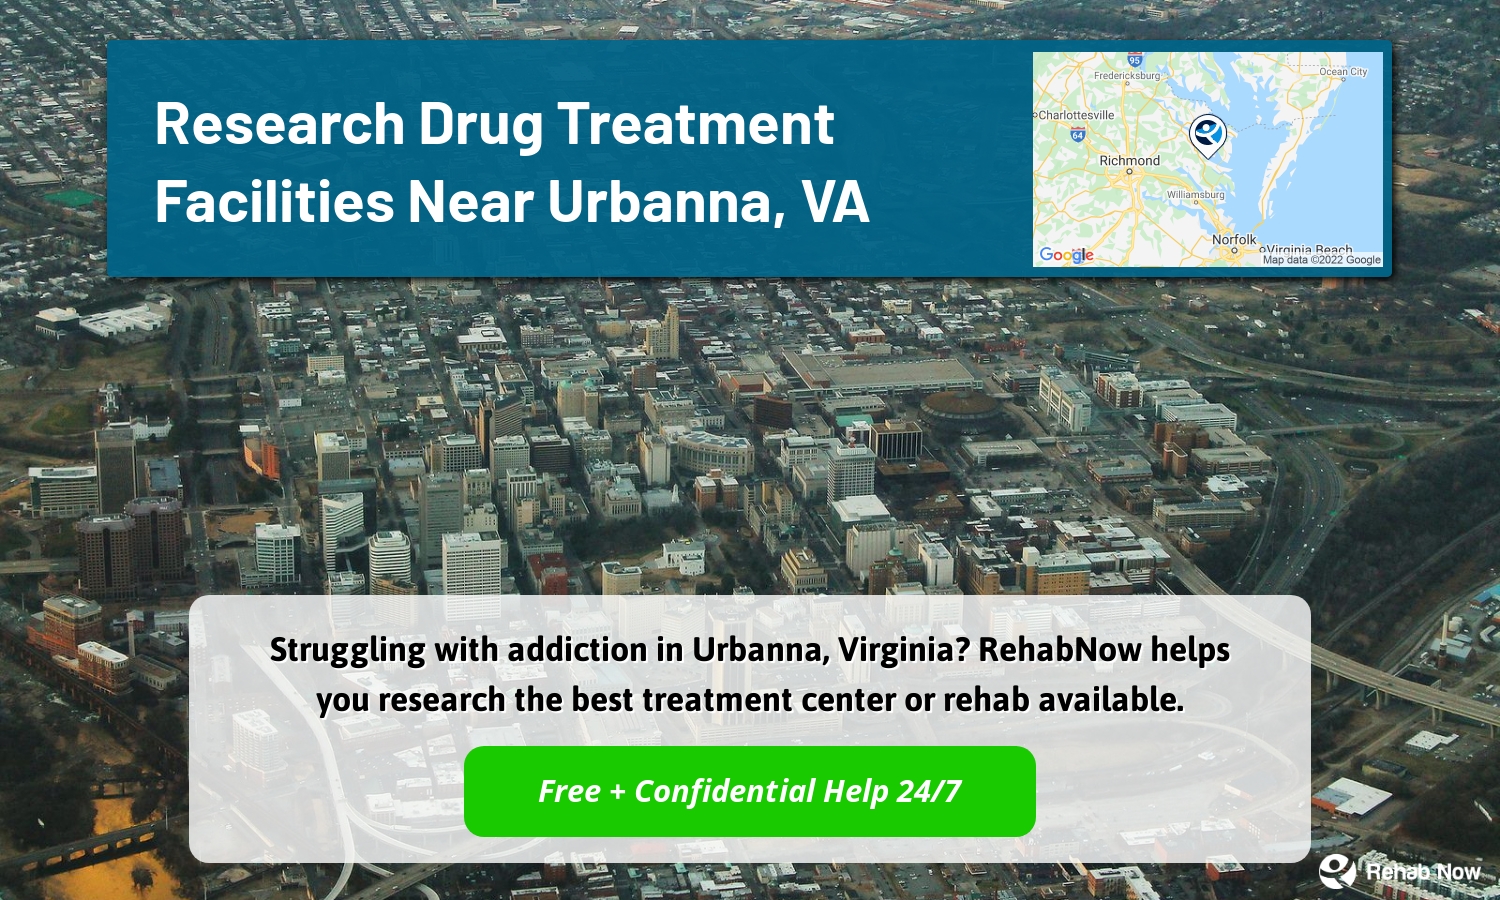 Struggling with addiction in Urbanna, Virginia? RehabNow helps you research the best treatment center or rehab available.